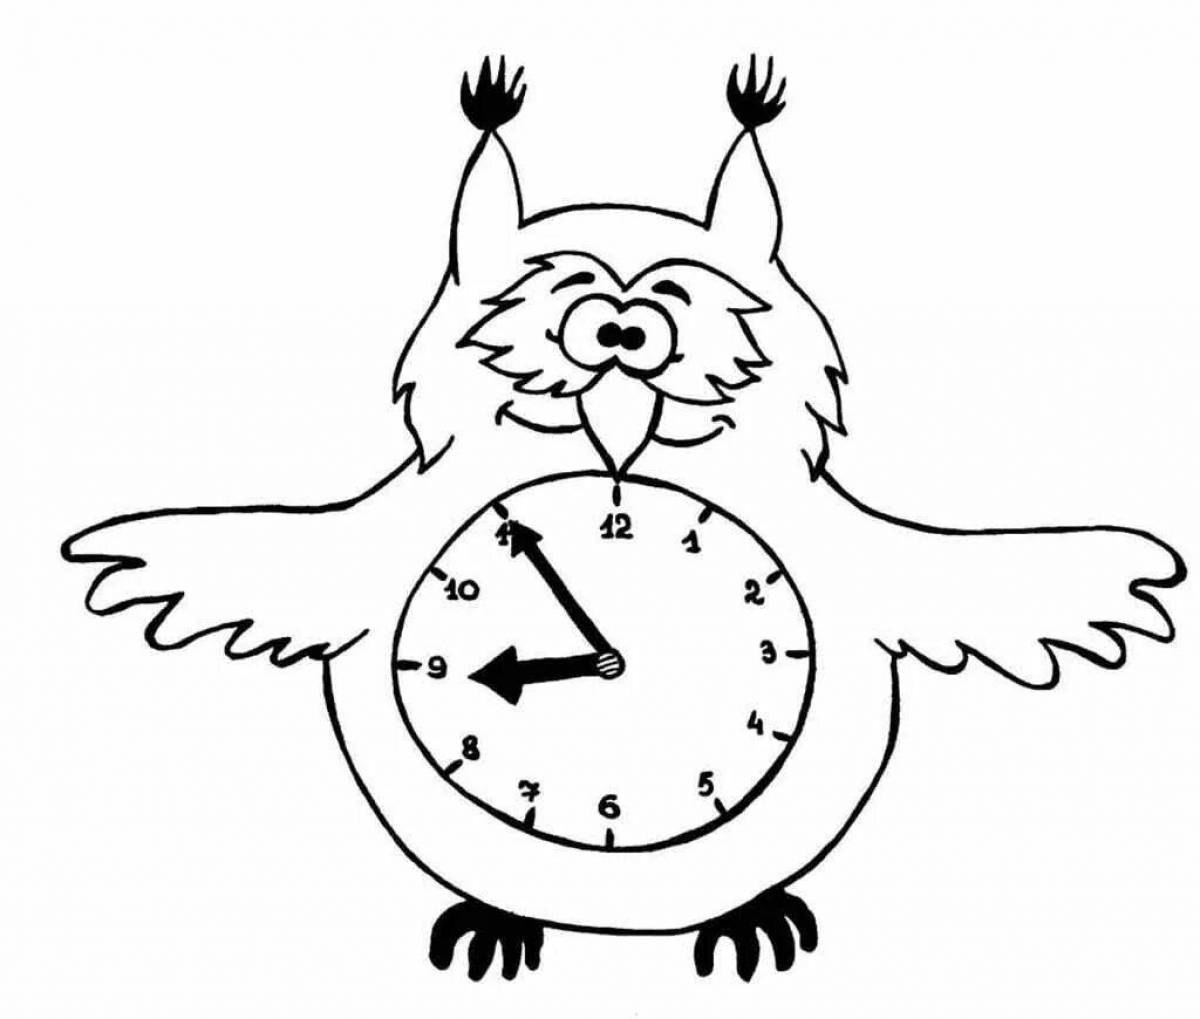 Adorable wall clock coloring page